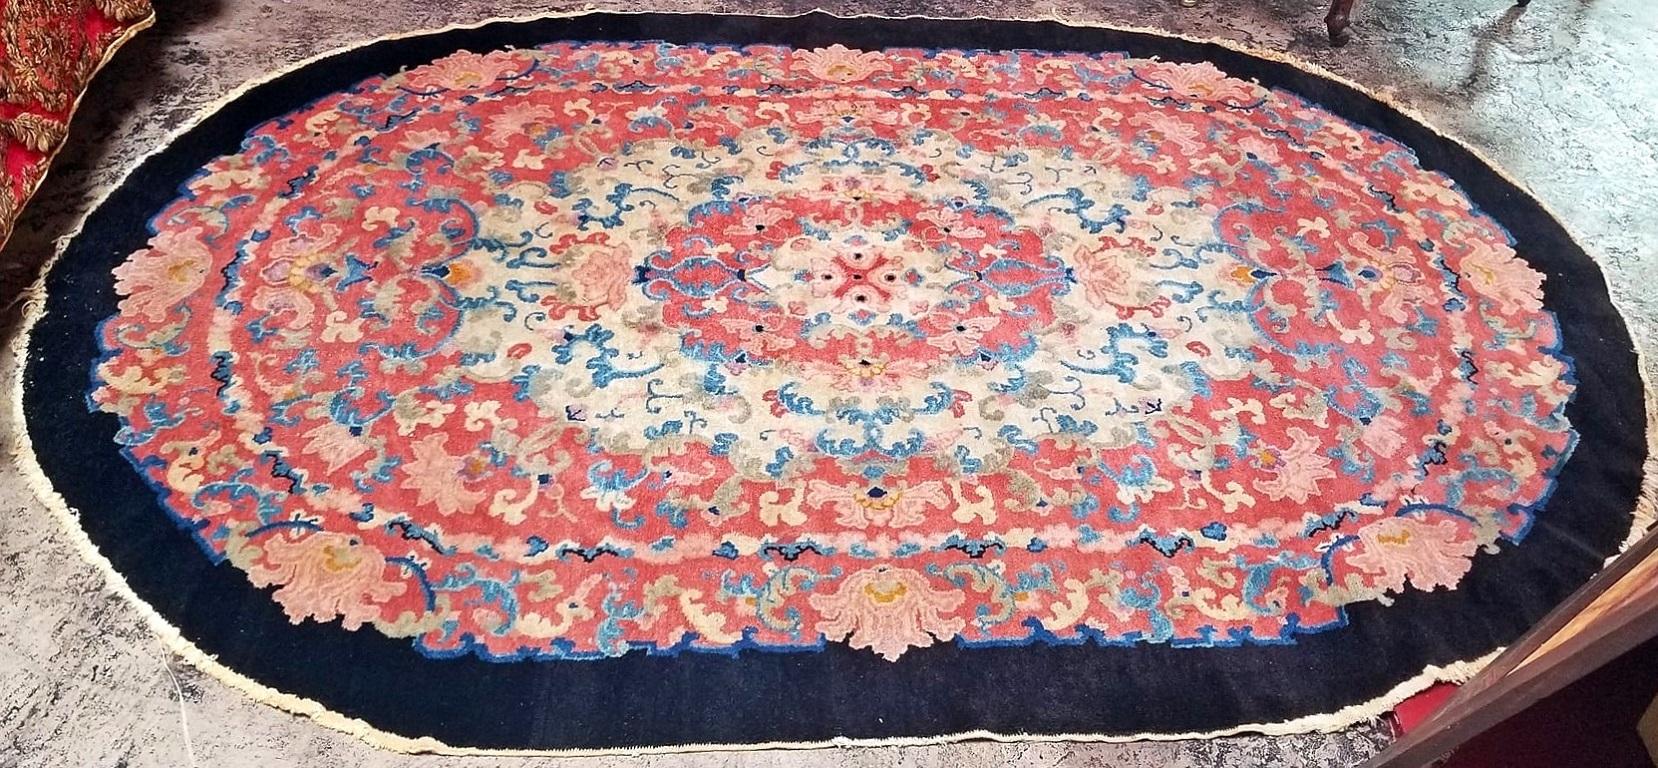 PRESENTING a BEAUTIFUL and RARE medium sized Helen Fette Oriental Rug from the Art Deco Era.

Beautifully detailed and HIGH QUALITY wool weave.

Lovely patina consistent with age.

Helen Fette was an American missionary, who went to China around